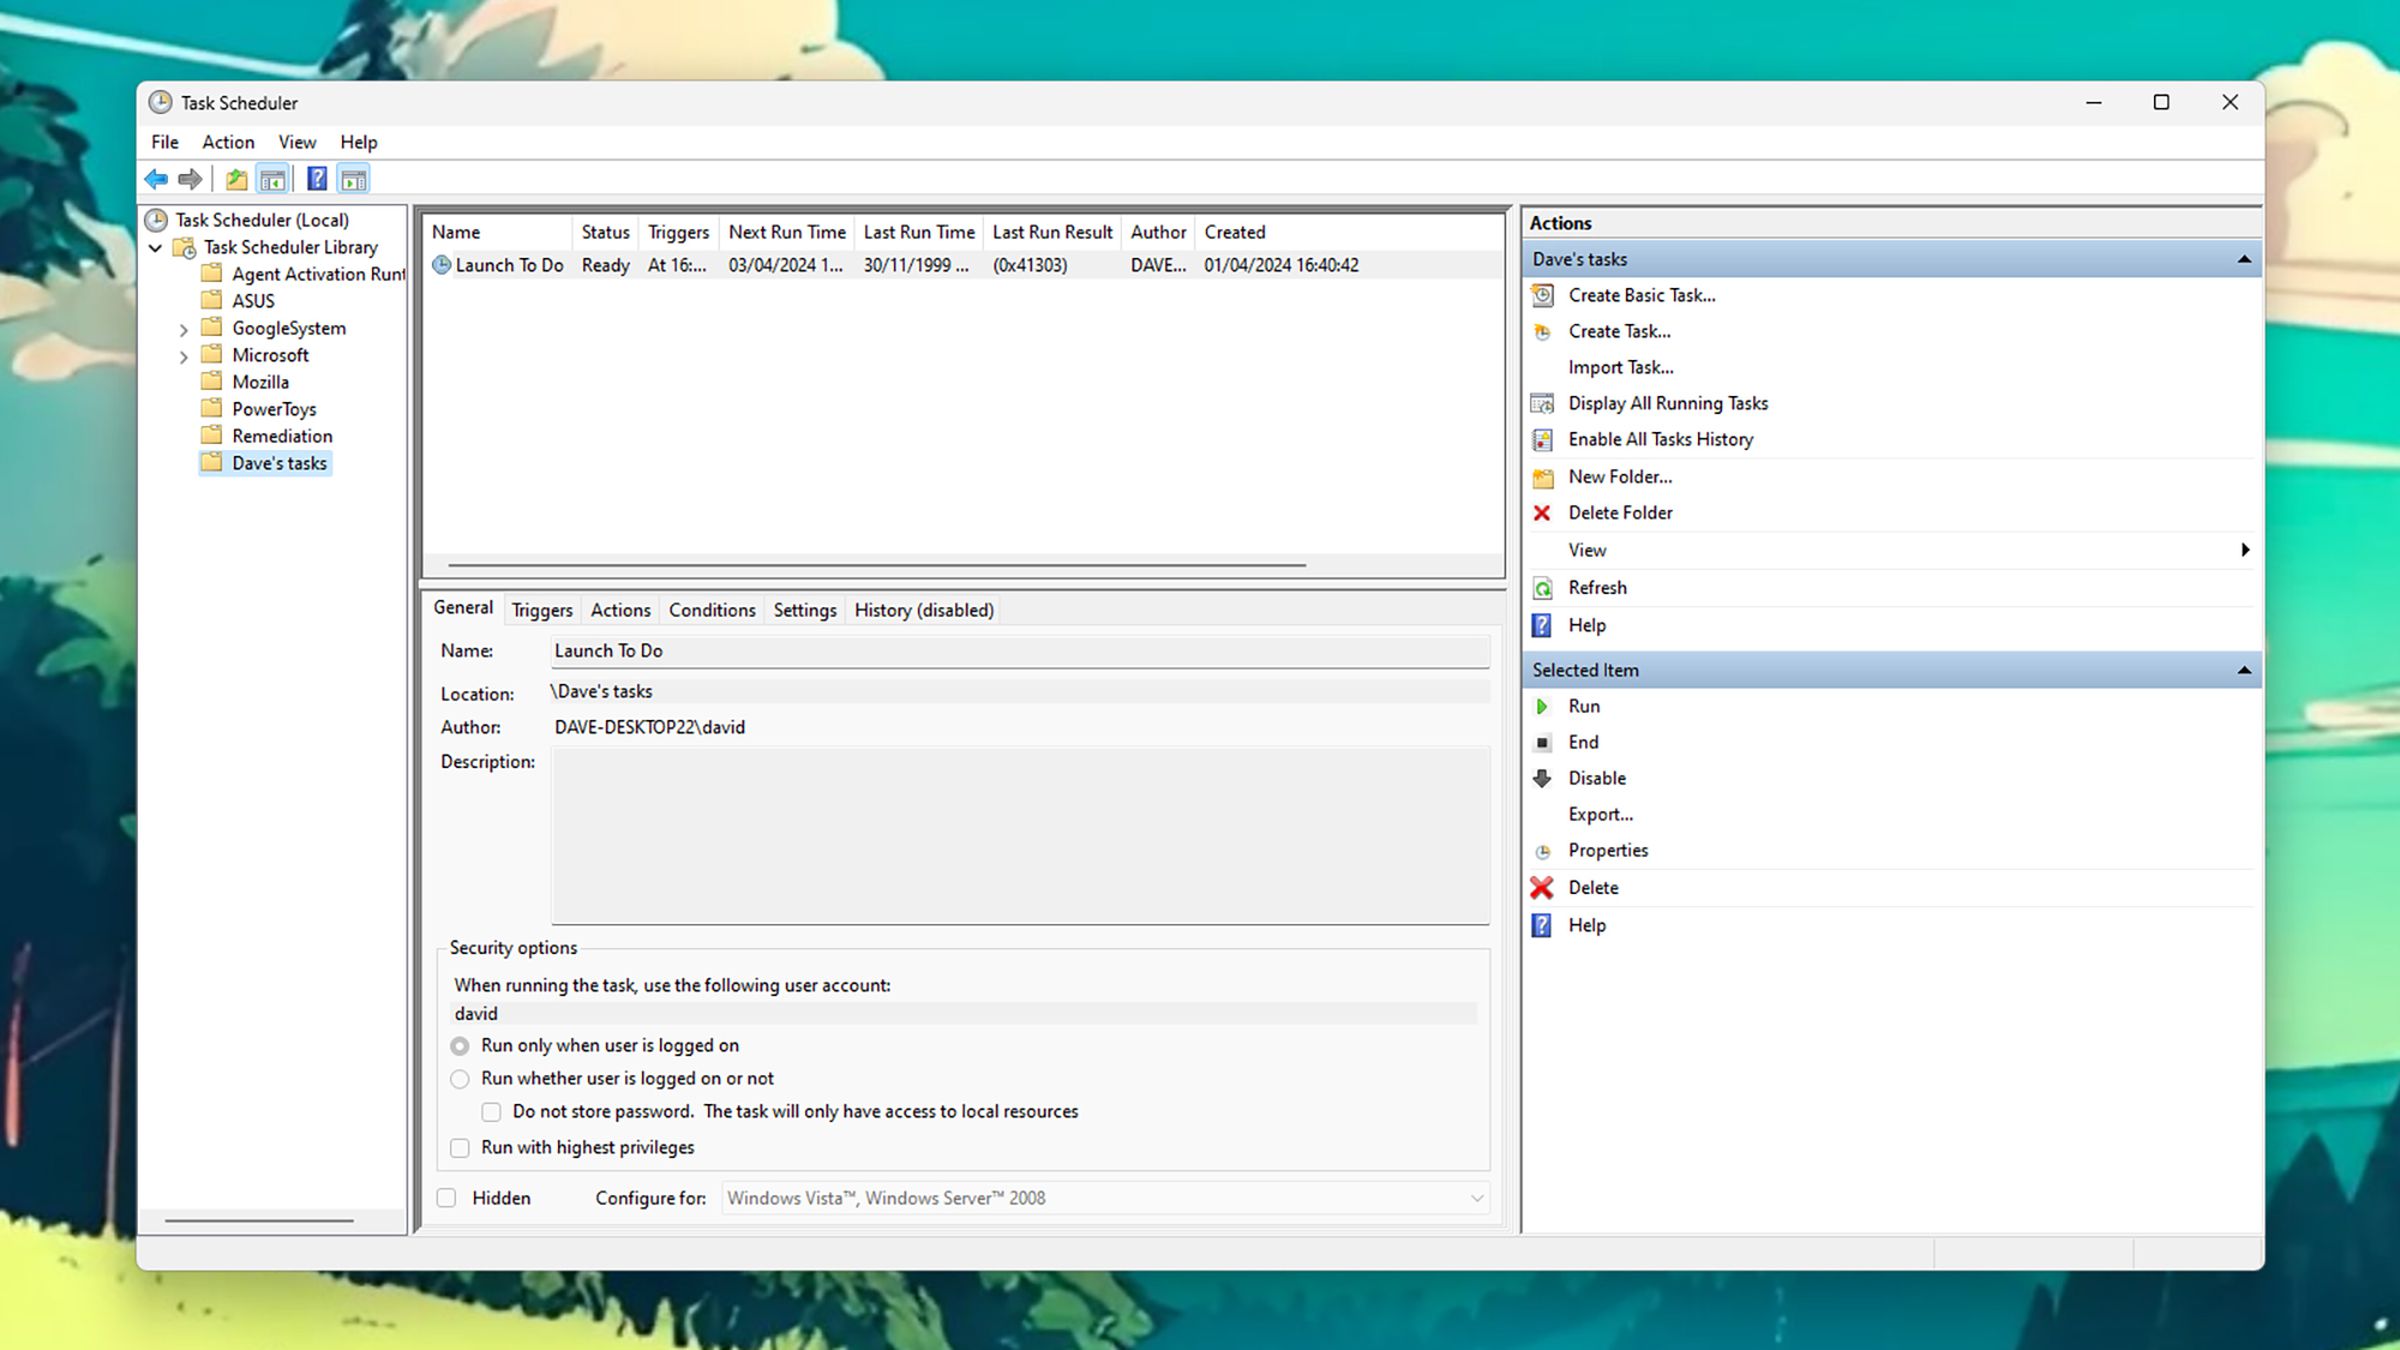 Windows screen with large Task Scheduler window; menu at left, boxes with various text messages in center, list of actions on right.